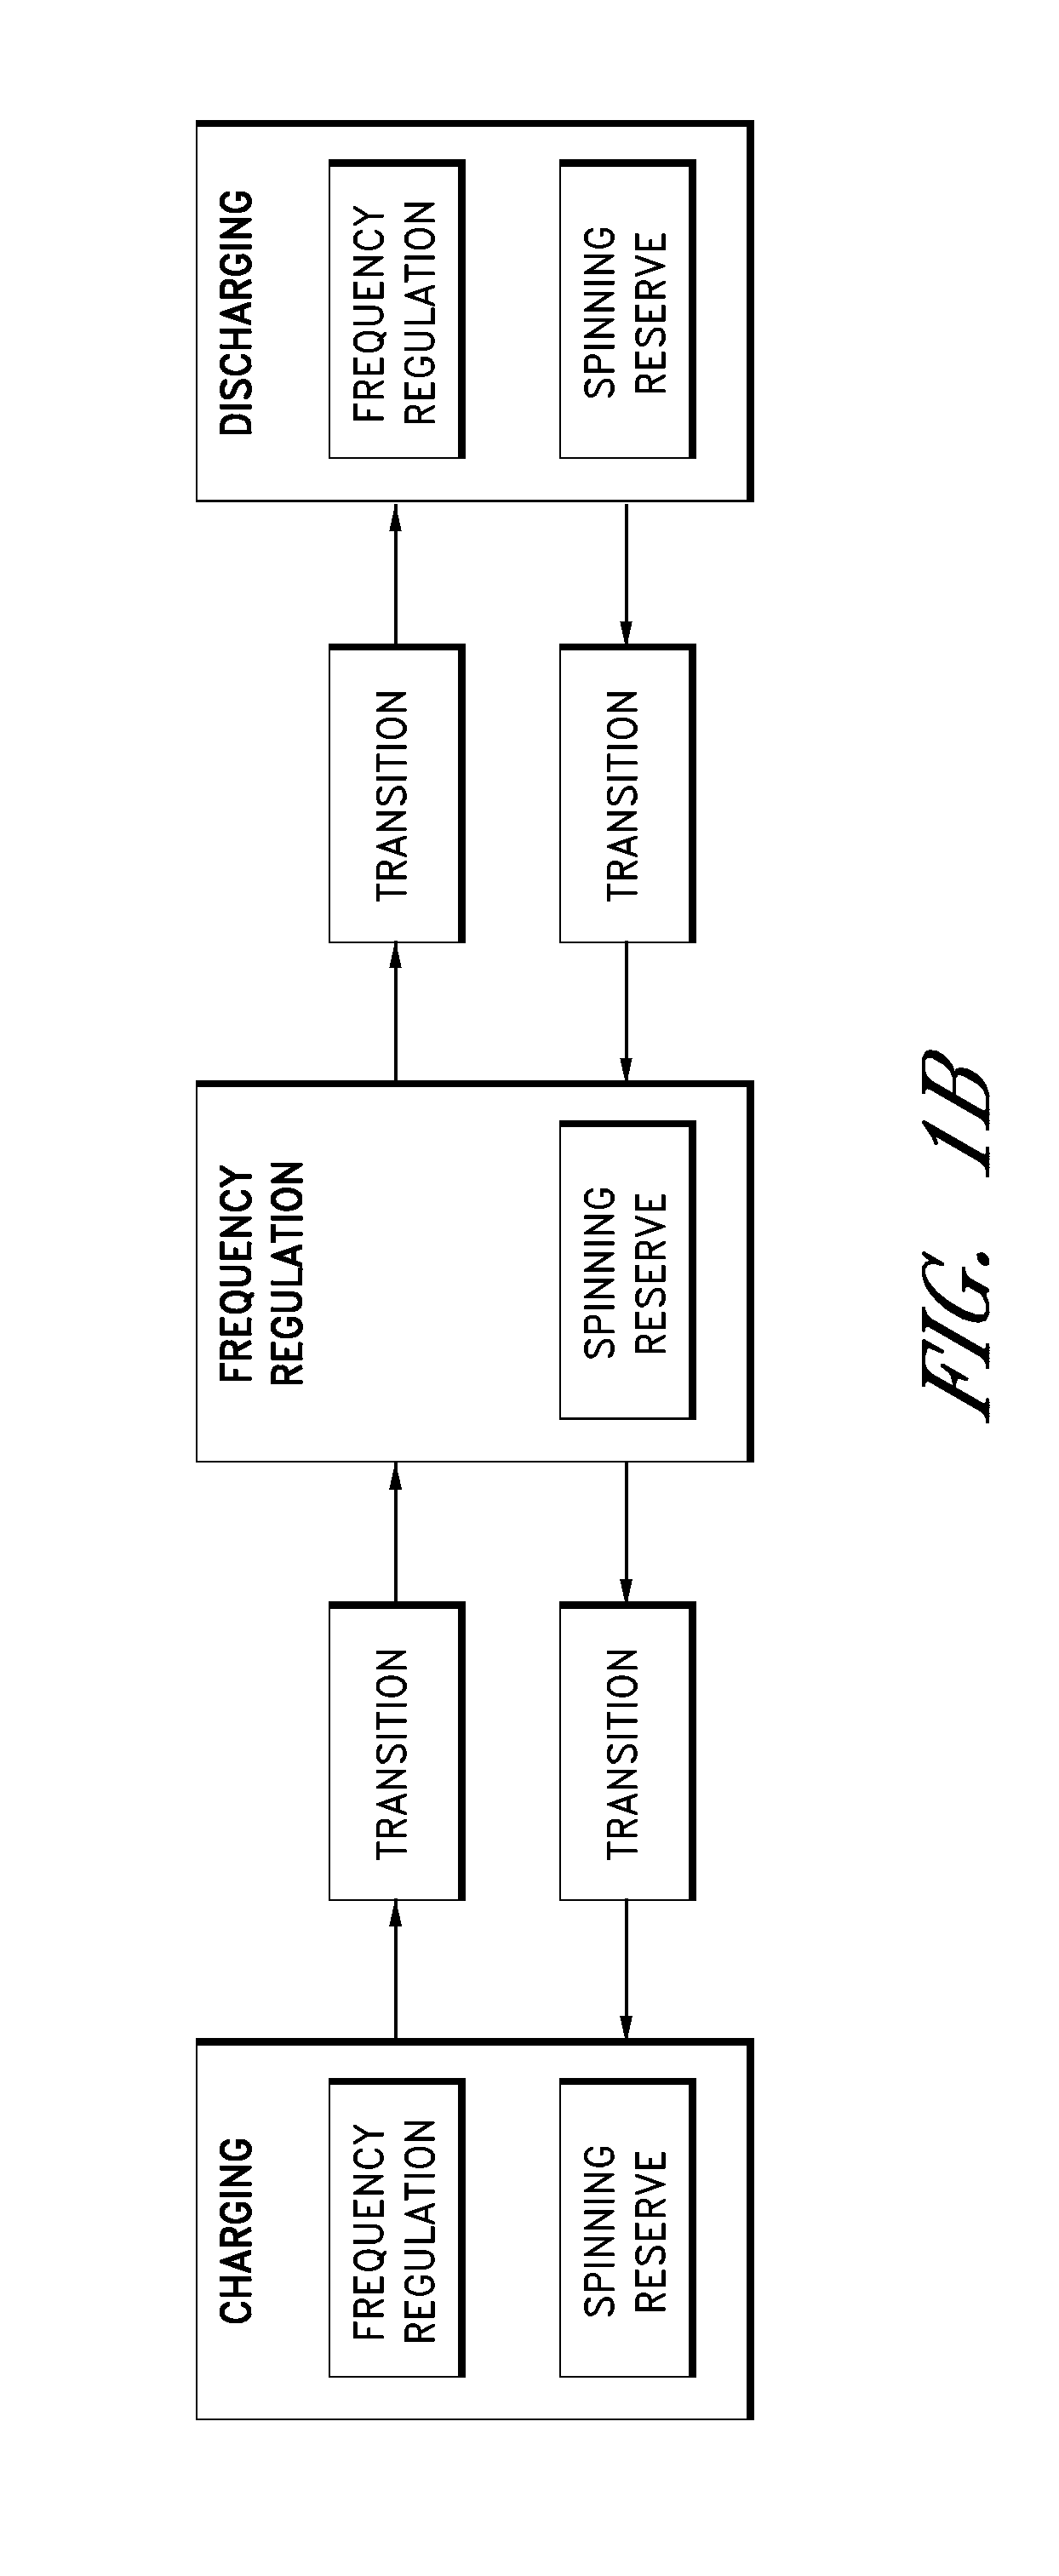 Apparatuses and methods for energy storage